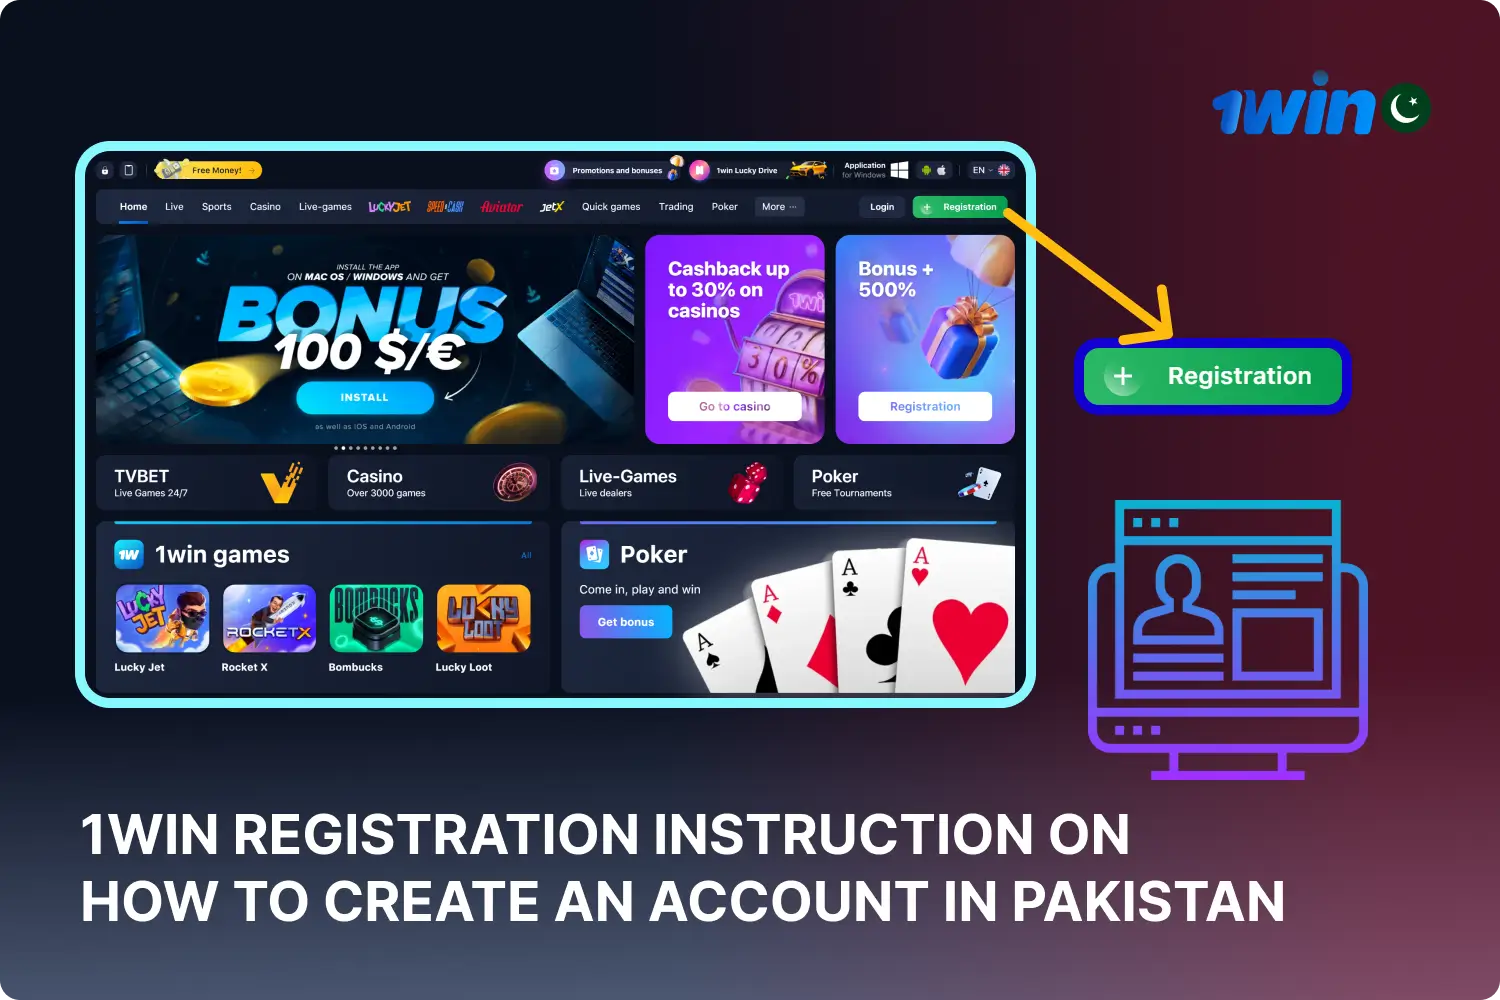 Quick and easy registration with 1win gives Pakistani players access to sports betting and real money casino games